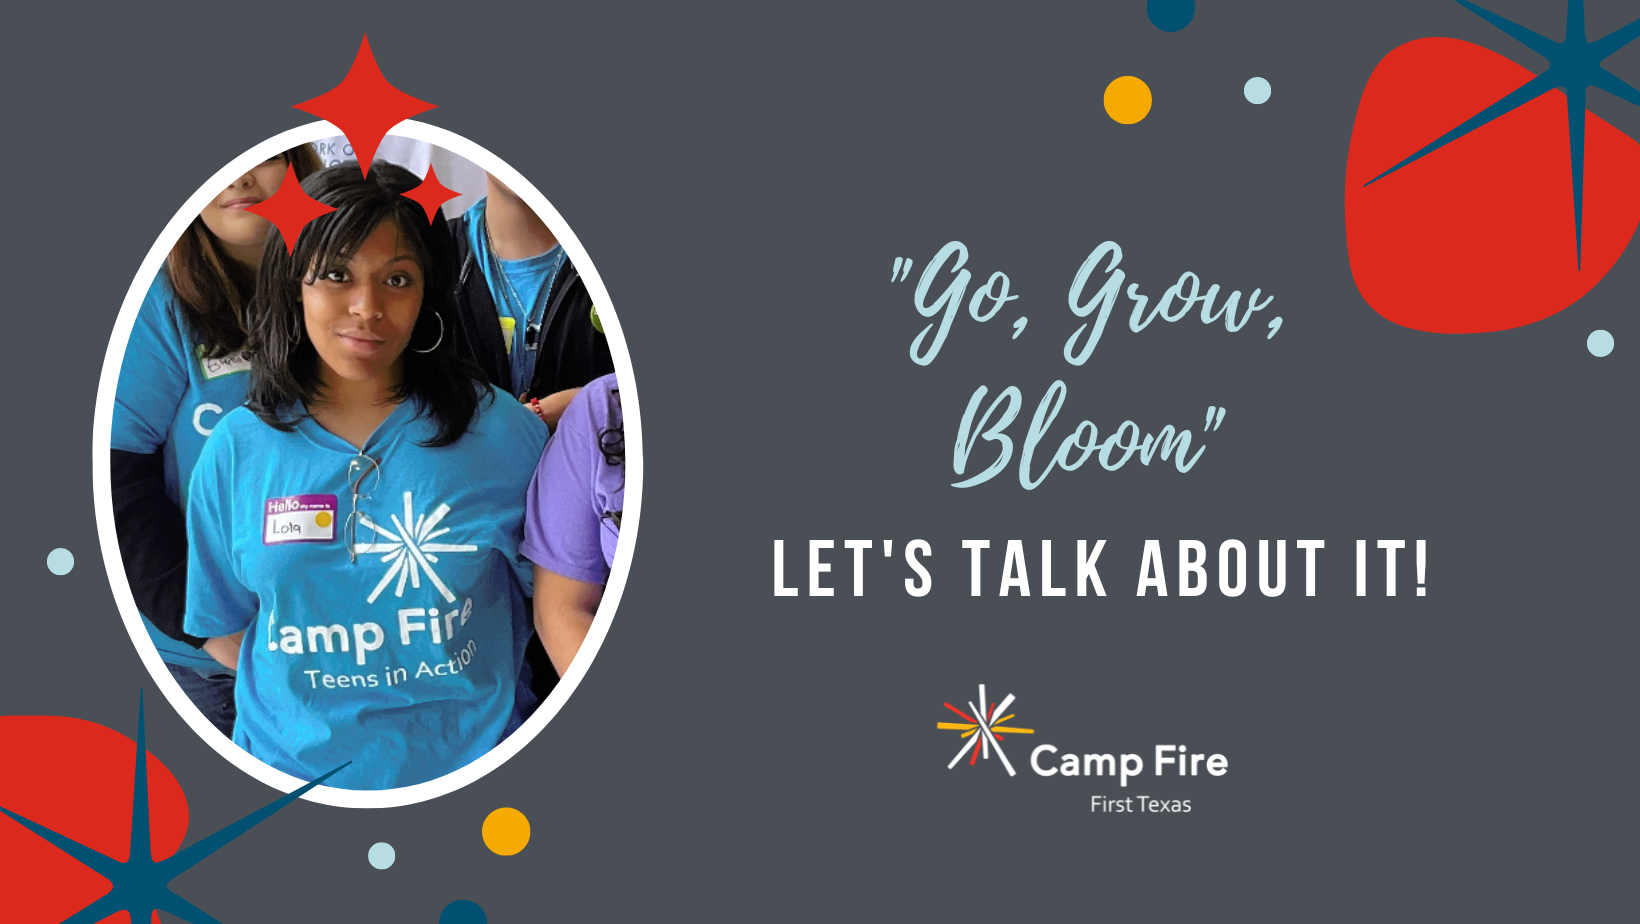 "Go, Grow, Bloom" - Let's Talk About It!, a Camp Fire First Texas blog by Amber Robinson